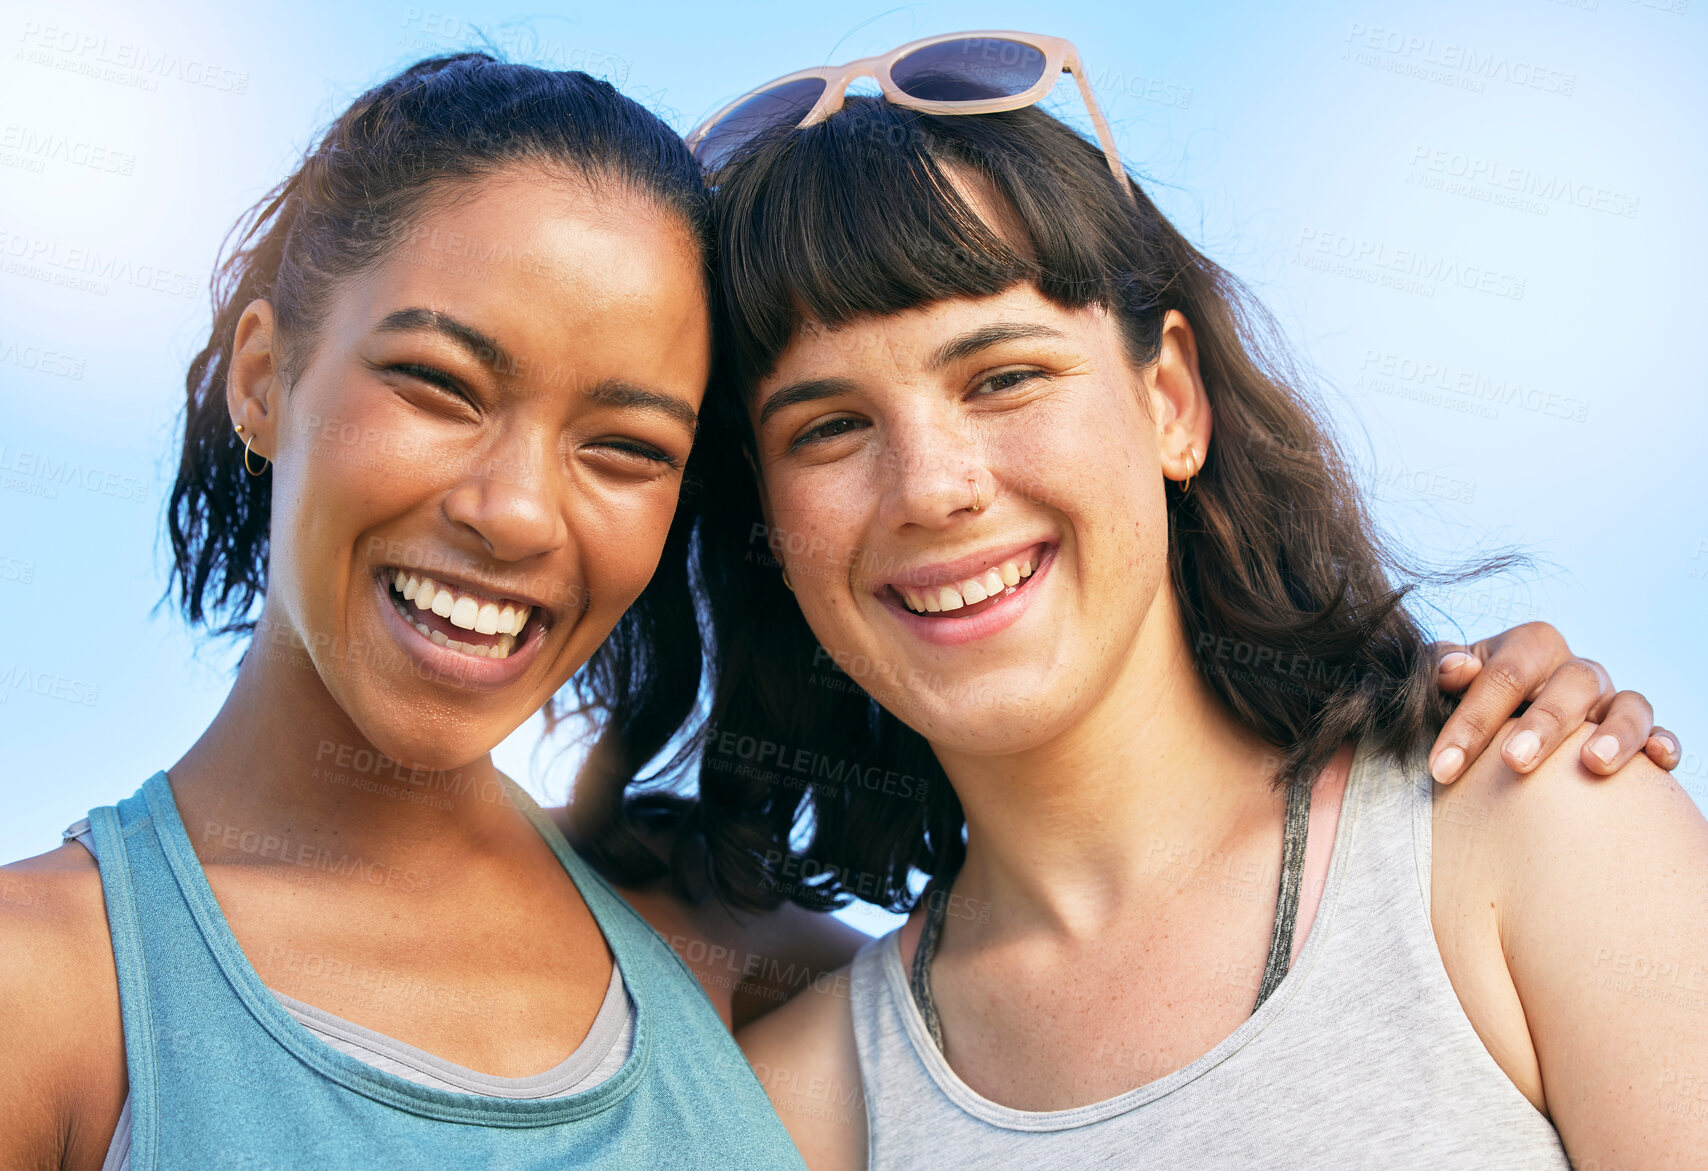 Buy stock photo Portrait of two smiling friends embracing while standing together against blue sky. Smiling happy young women bonding and hugging outside over summer break. Close best friends having fun on a weekend